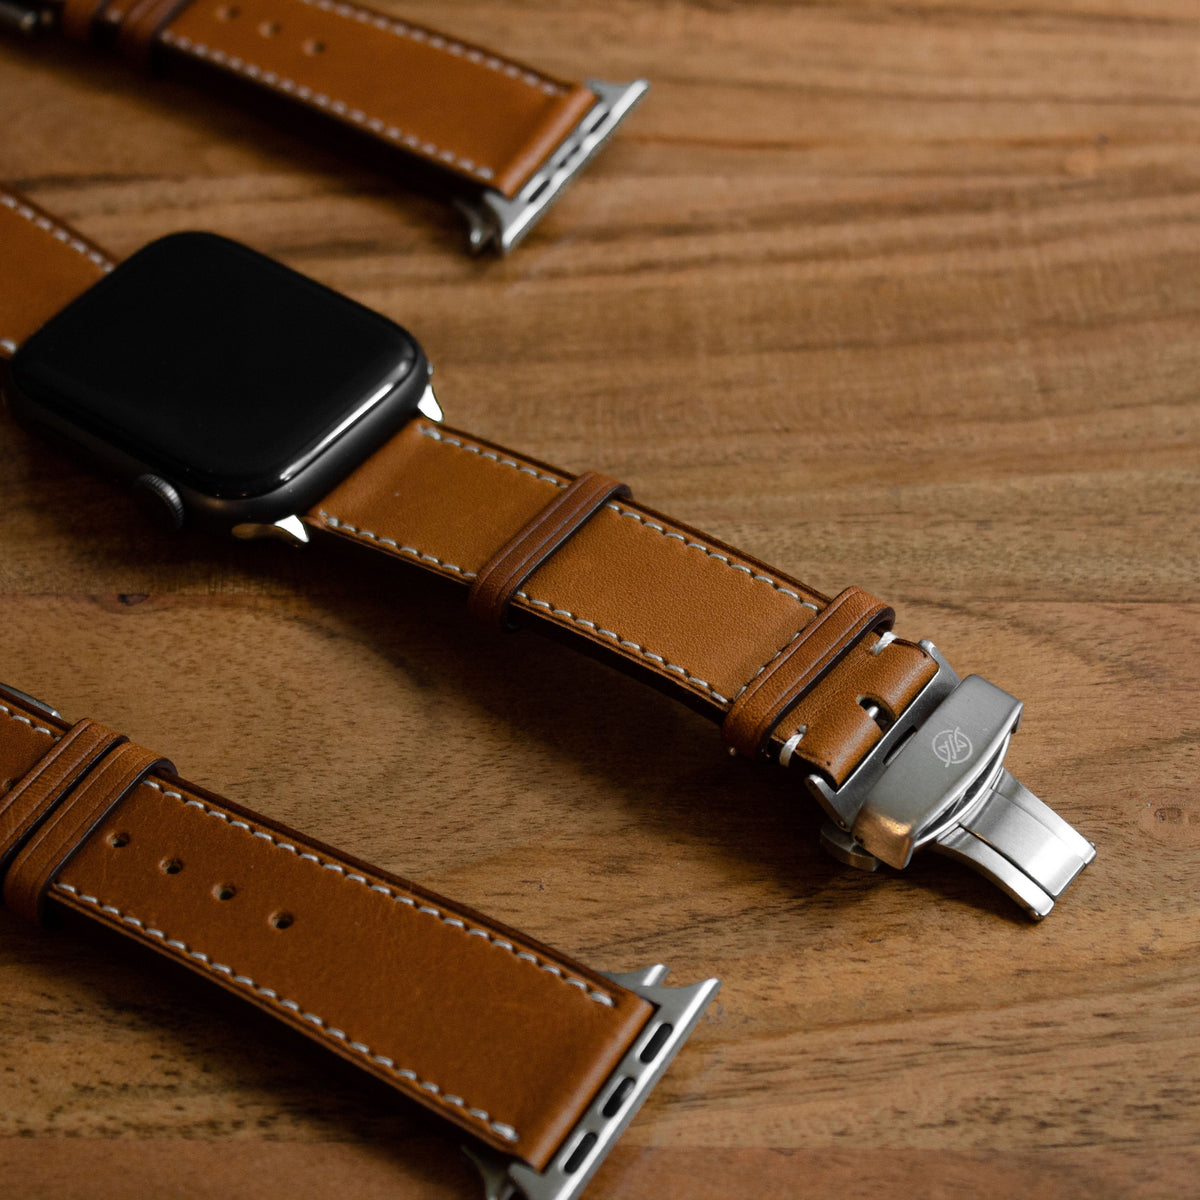 Monowear Urban Canvas and Cocktail Leather Apple Watch bands